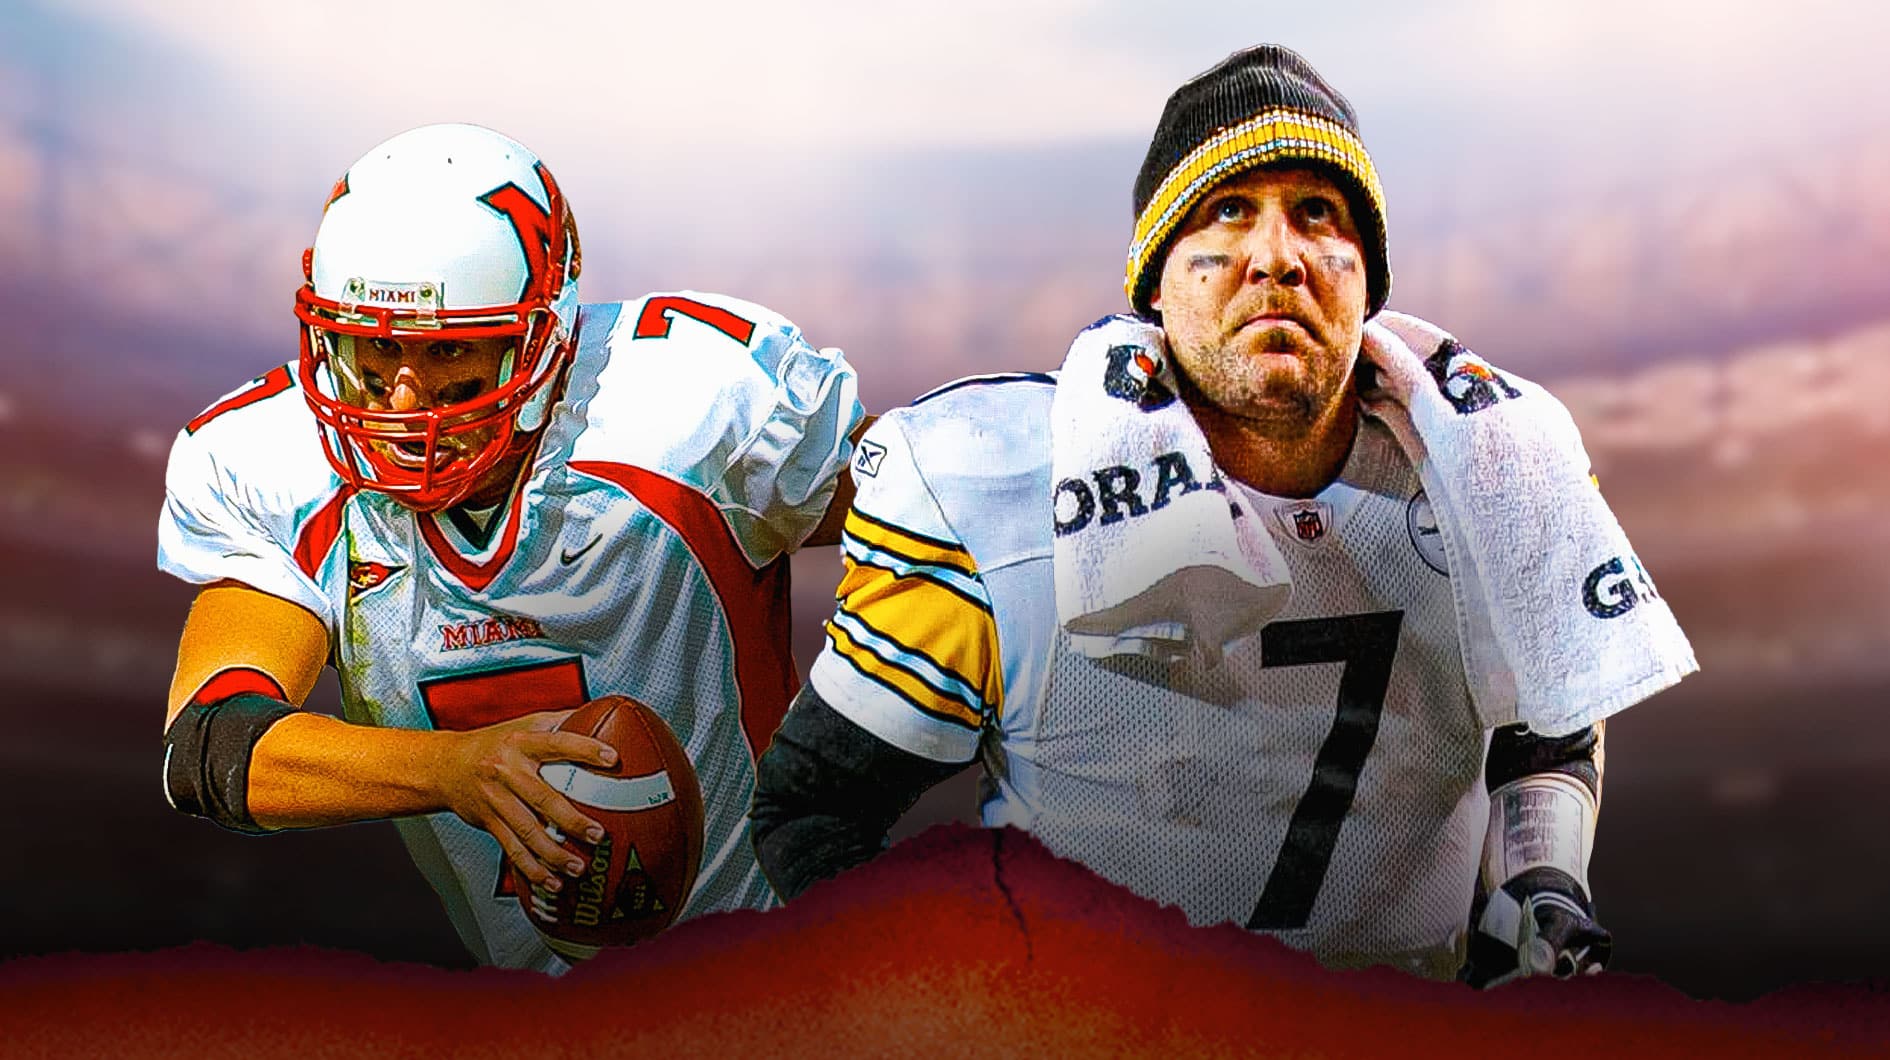 Ben Roethlisberger playing for Miami (OH) and the Pittsburgh Steelers.